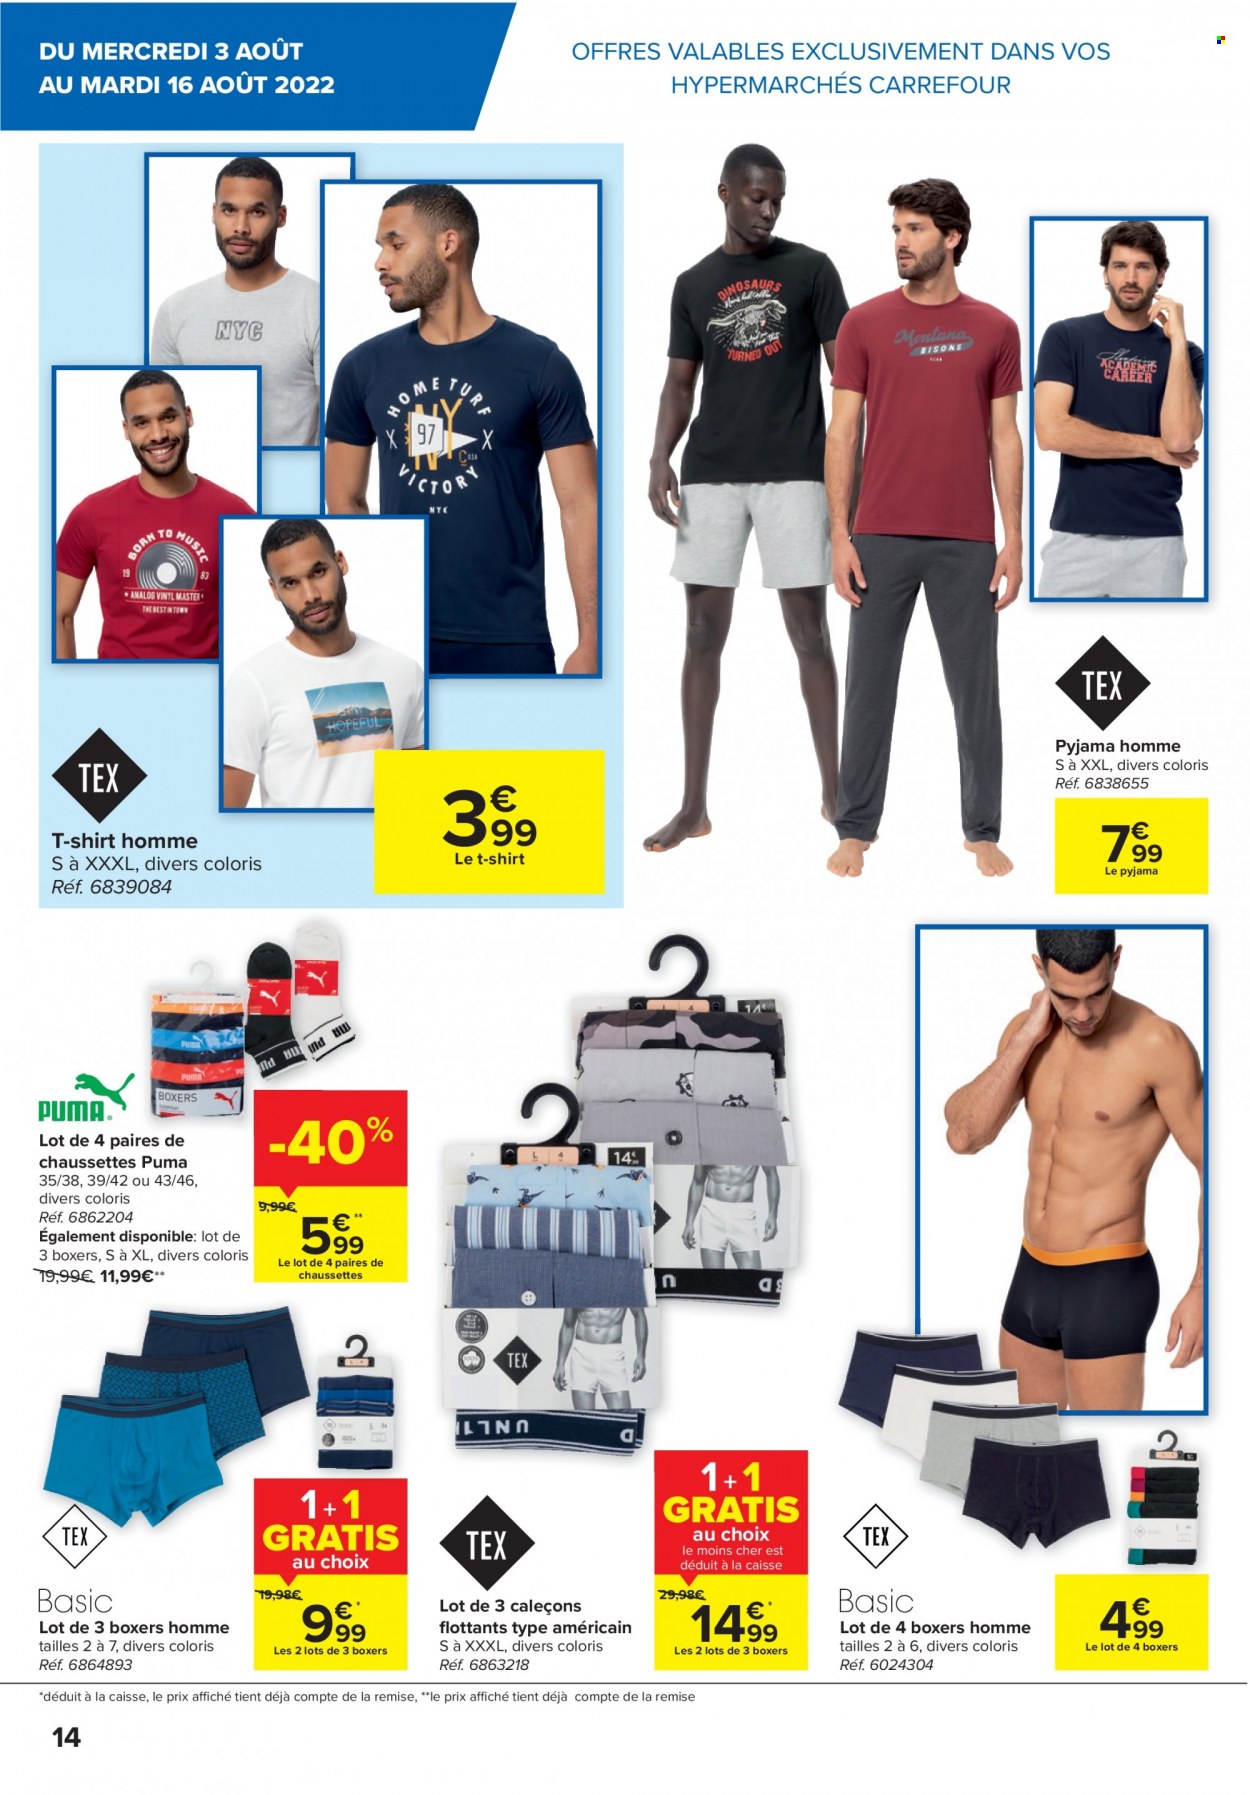 Catalogue Carrefour hypermarkt - 3.8.2022 - 16.8.2022. Page 14.